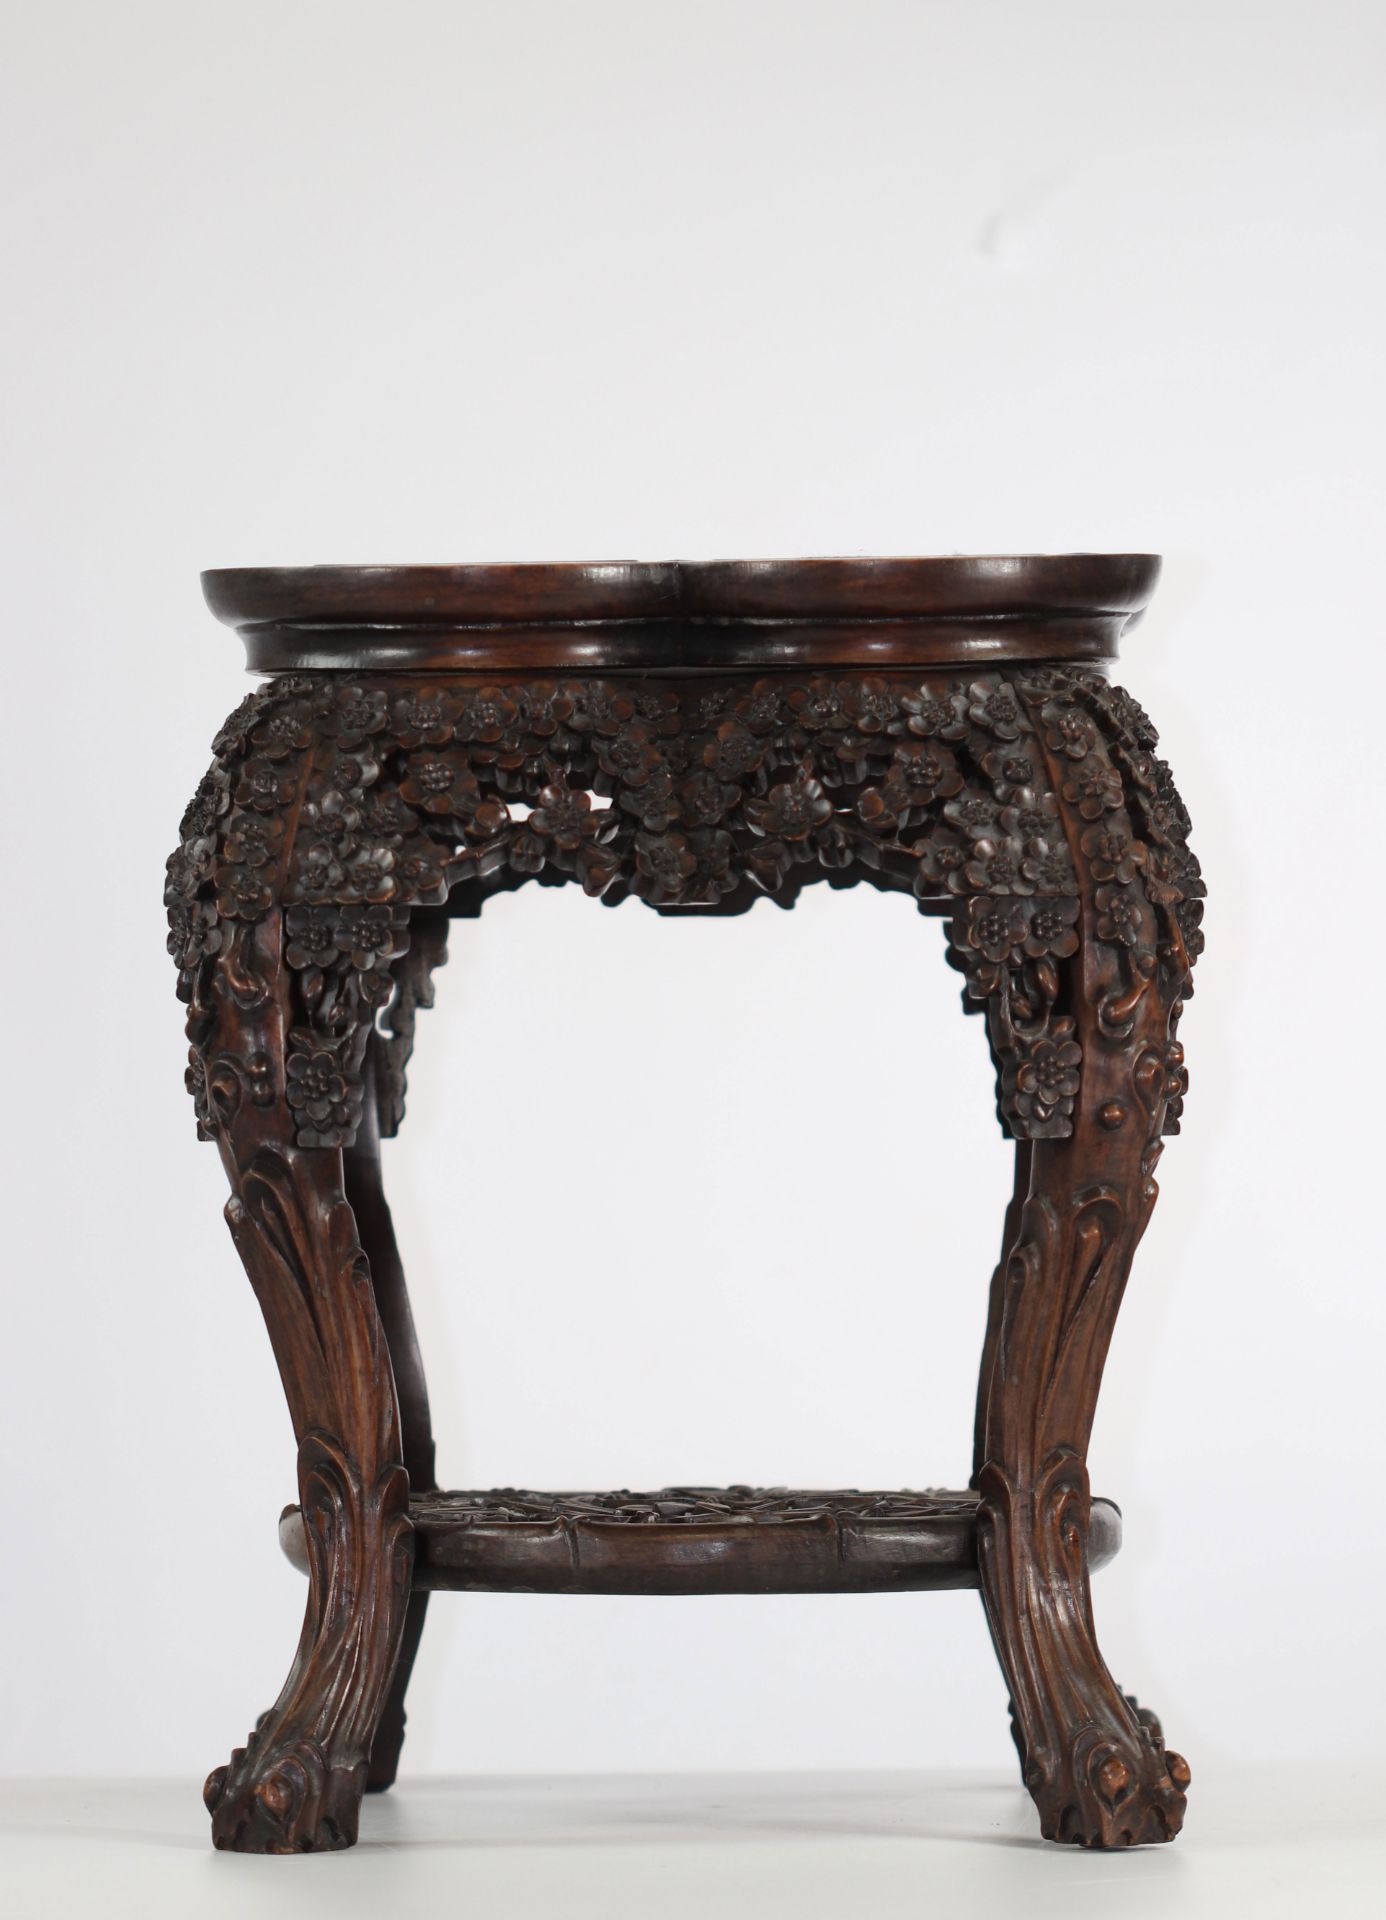 Ironwood stand with mother-of-pearl inlays, for the Peranakan Straits Nyonya market, China, 19th cen - Image 2 of 5